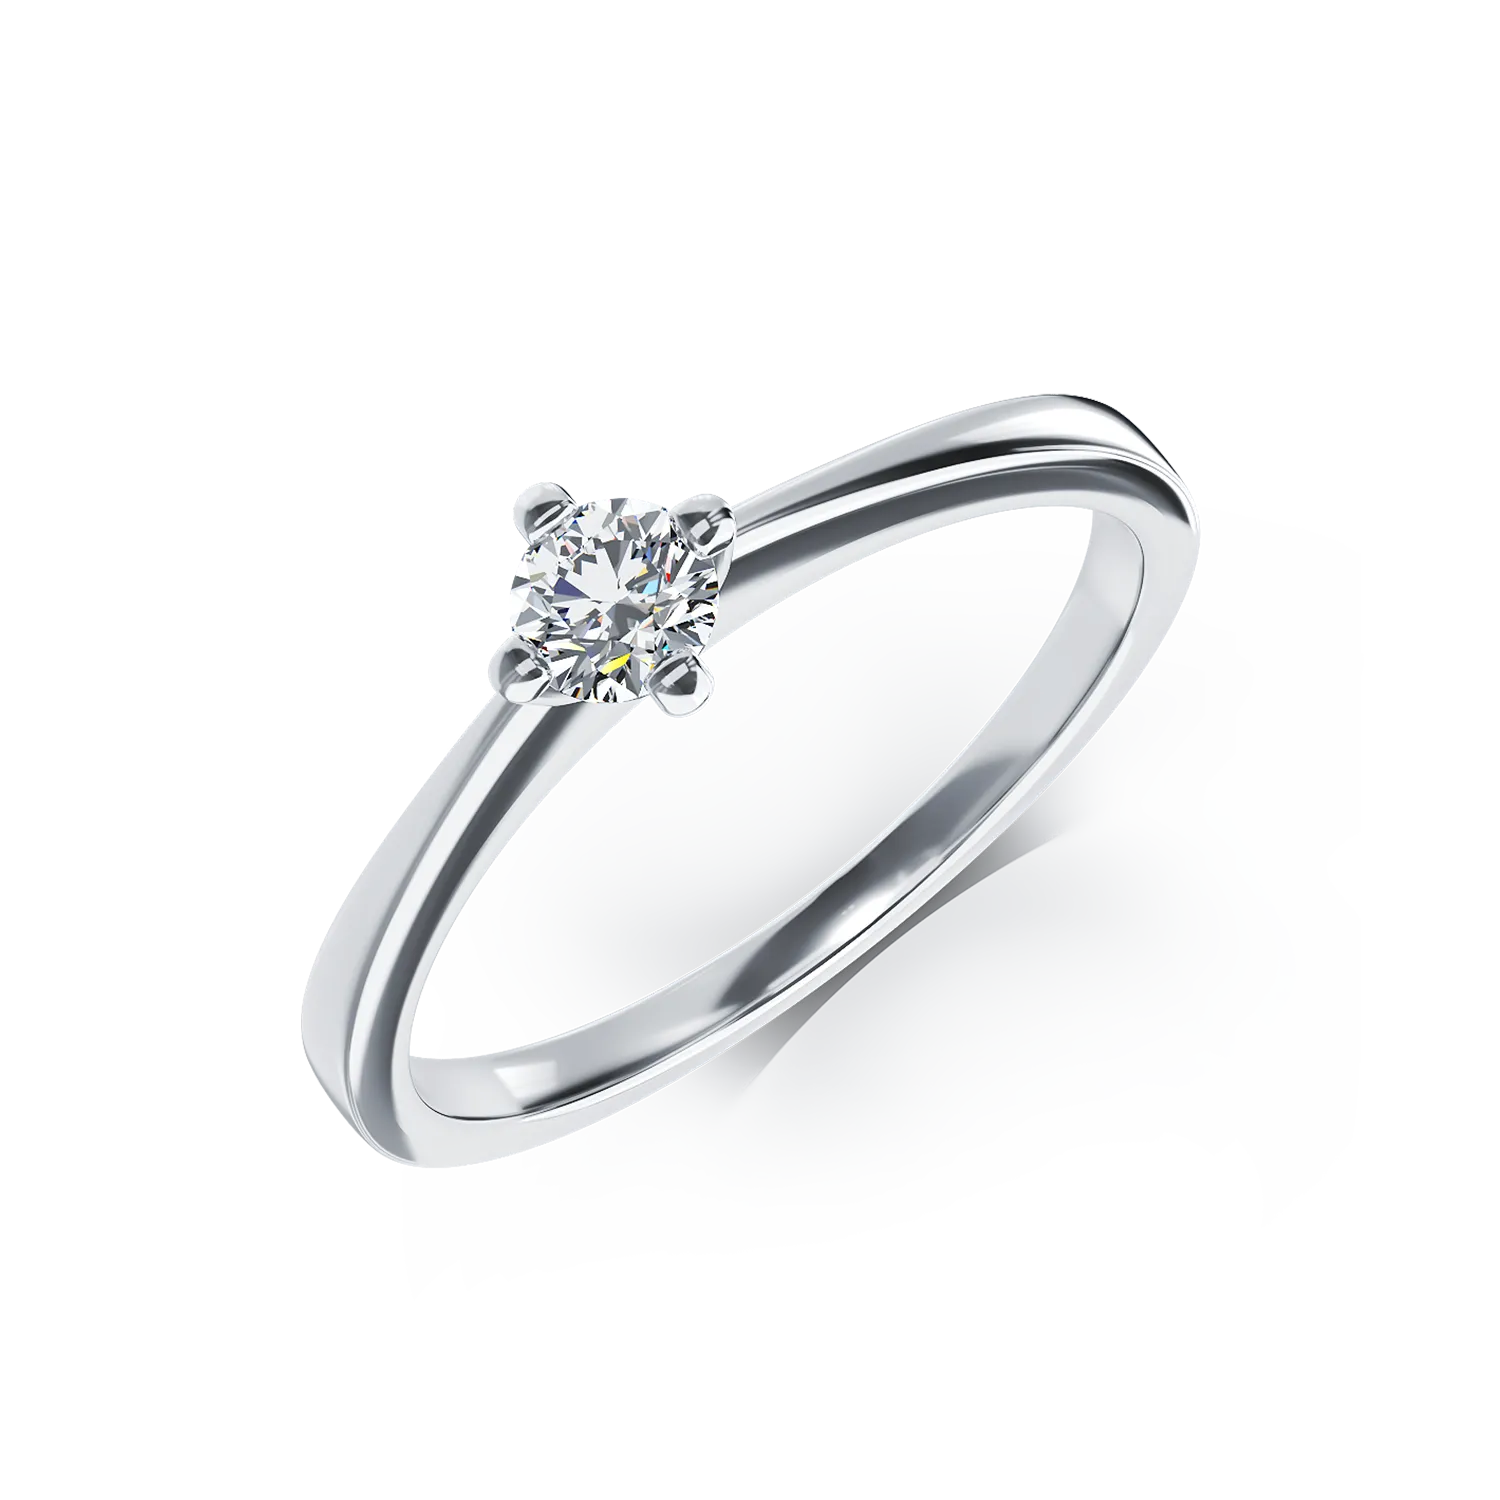 18K white gold engagement ring with a 0.26ct solitaire diamond